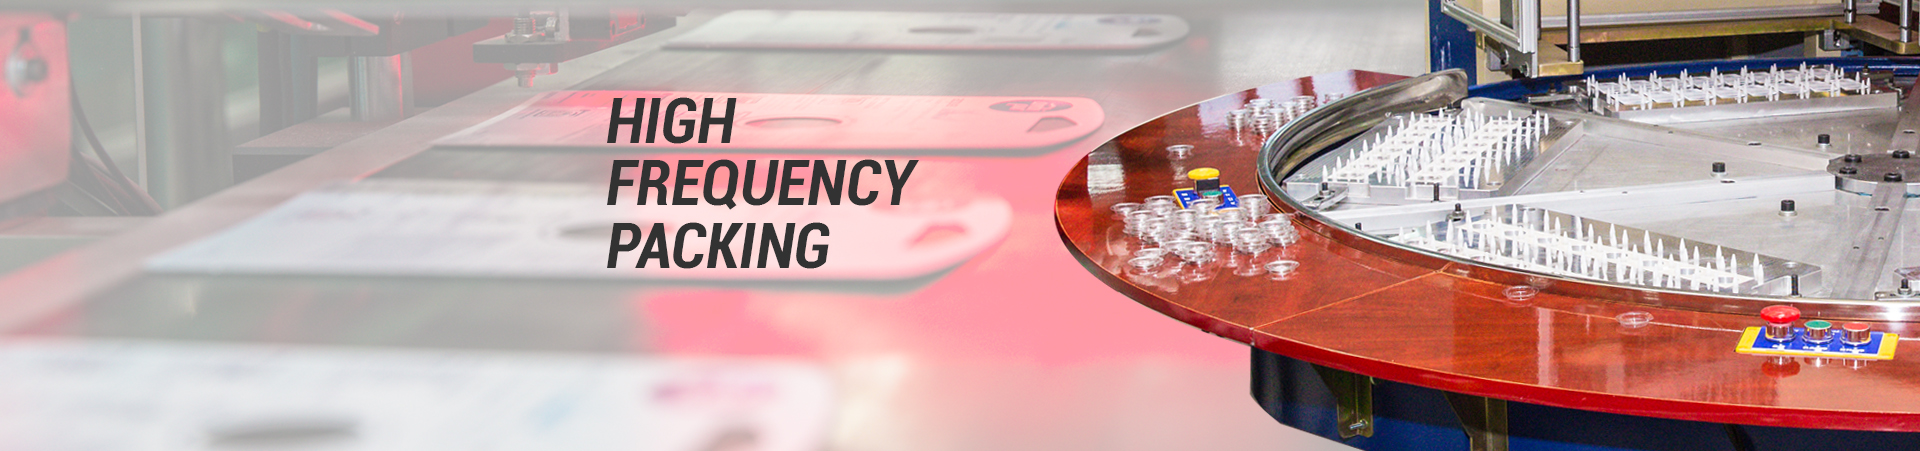 High-Frequency-Packing-Banner-1920x451